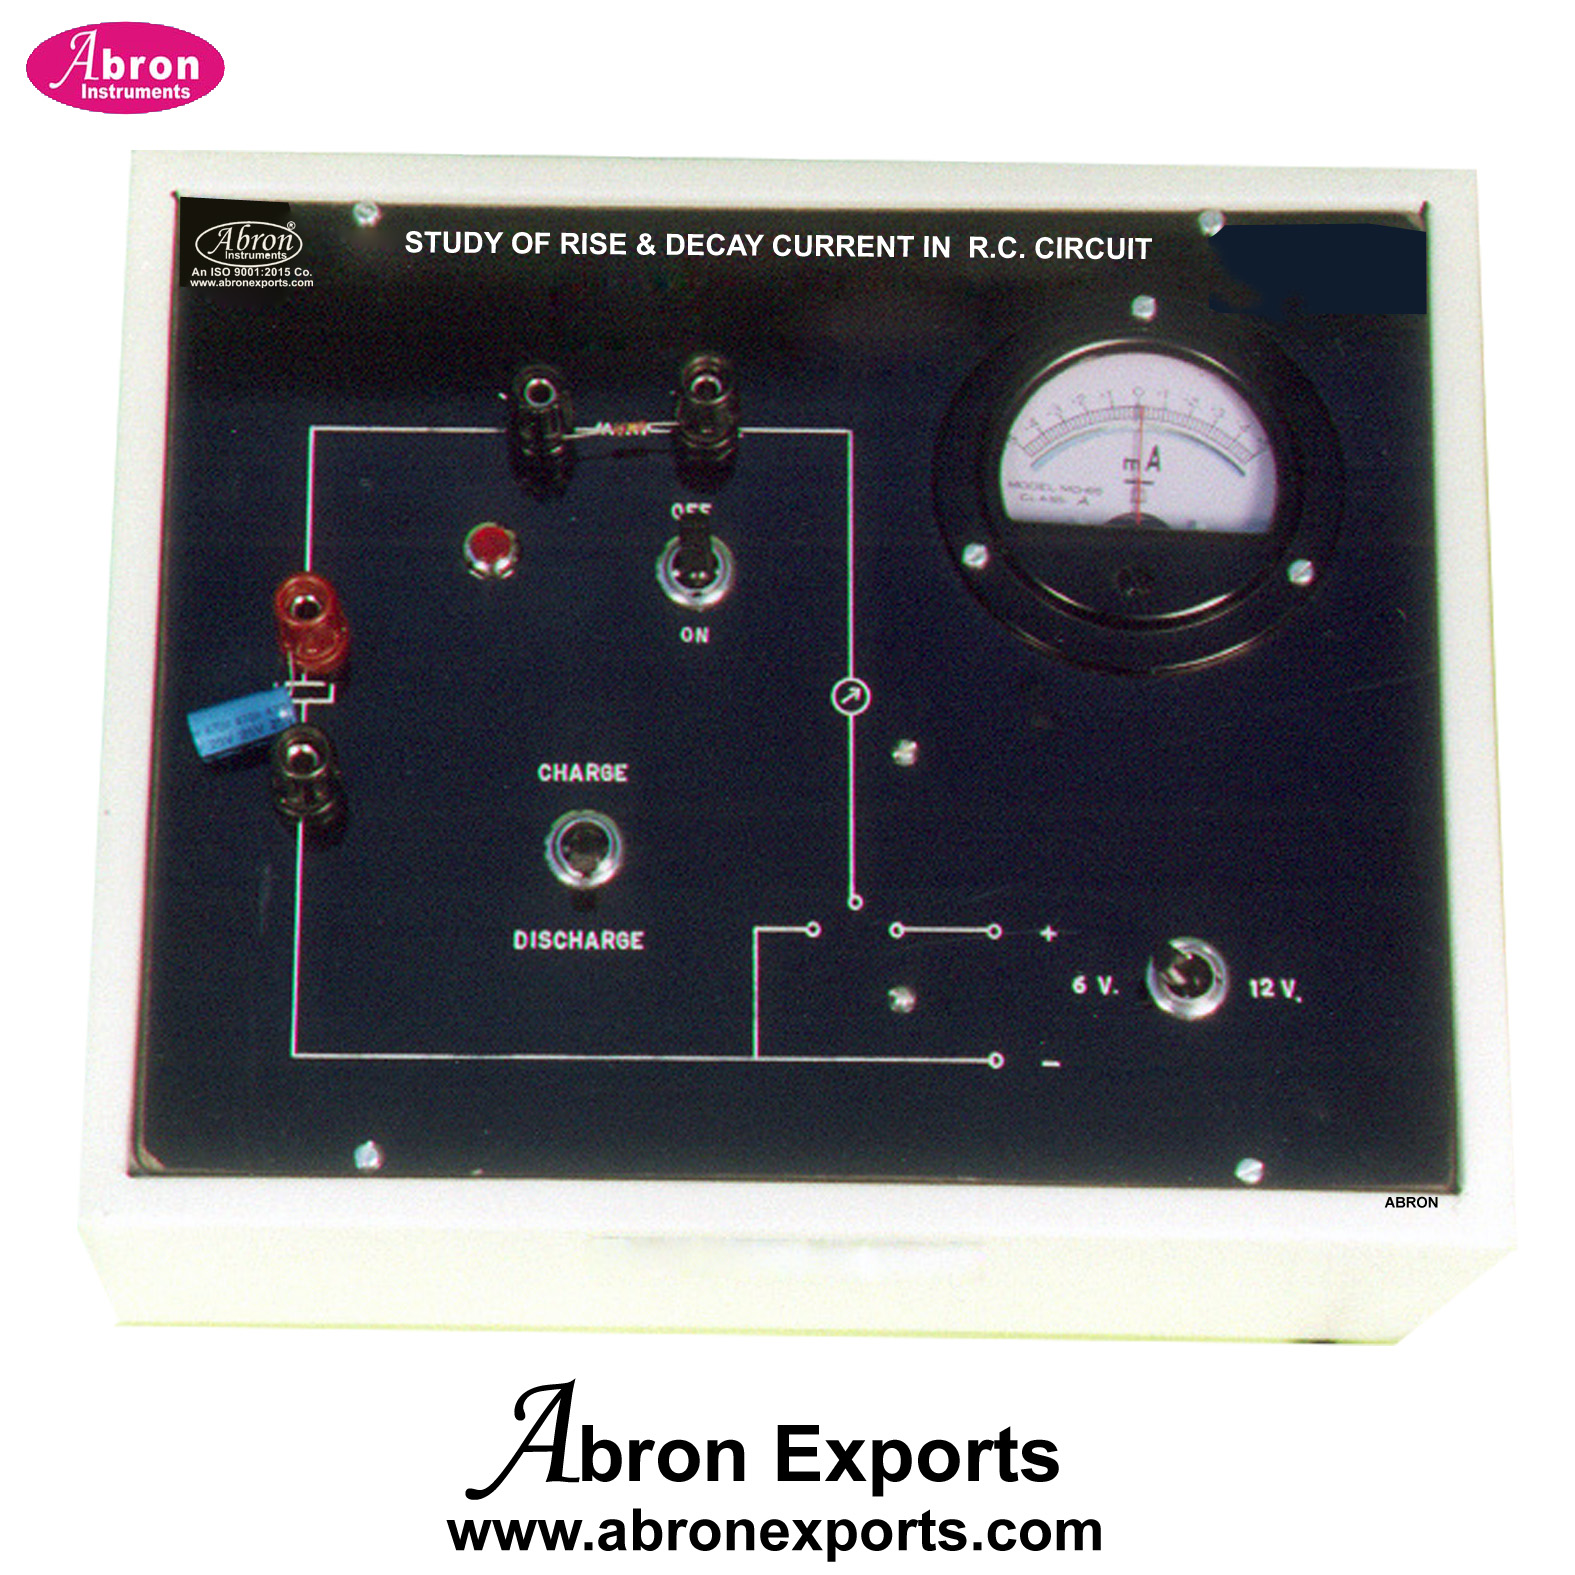 ETB Study of Rise and Decay in RC Circuit Output to Study on CRO Training Board Supply Abron AE-1258RD 